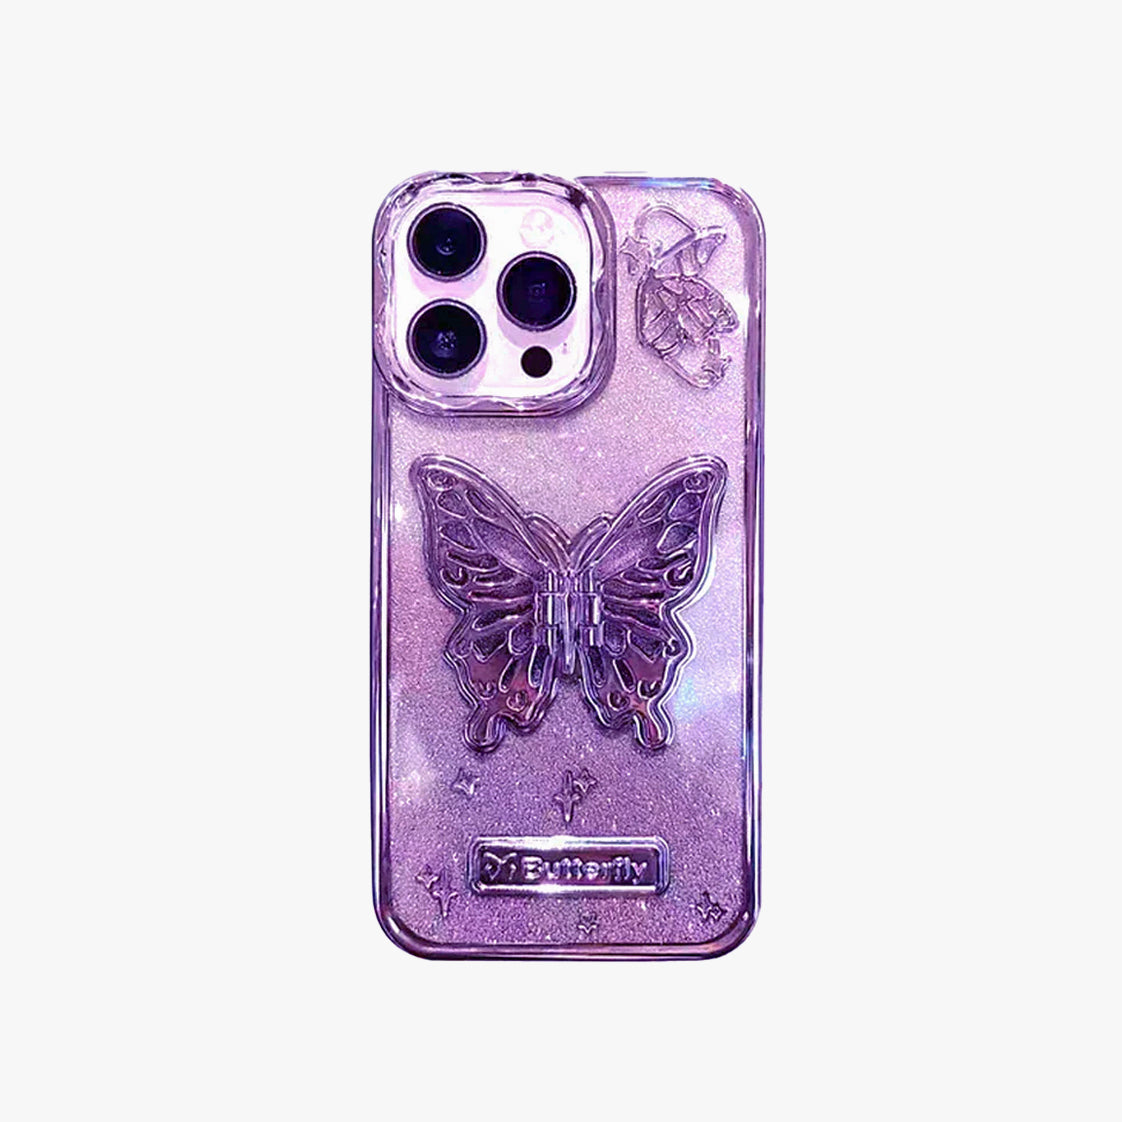 3D Magical Butterfly iPhone Case